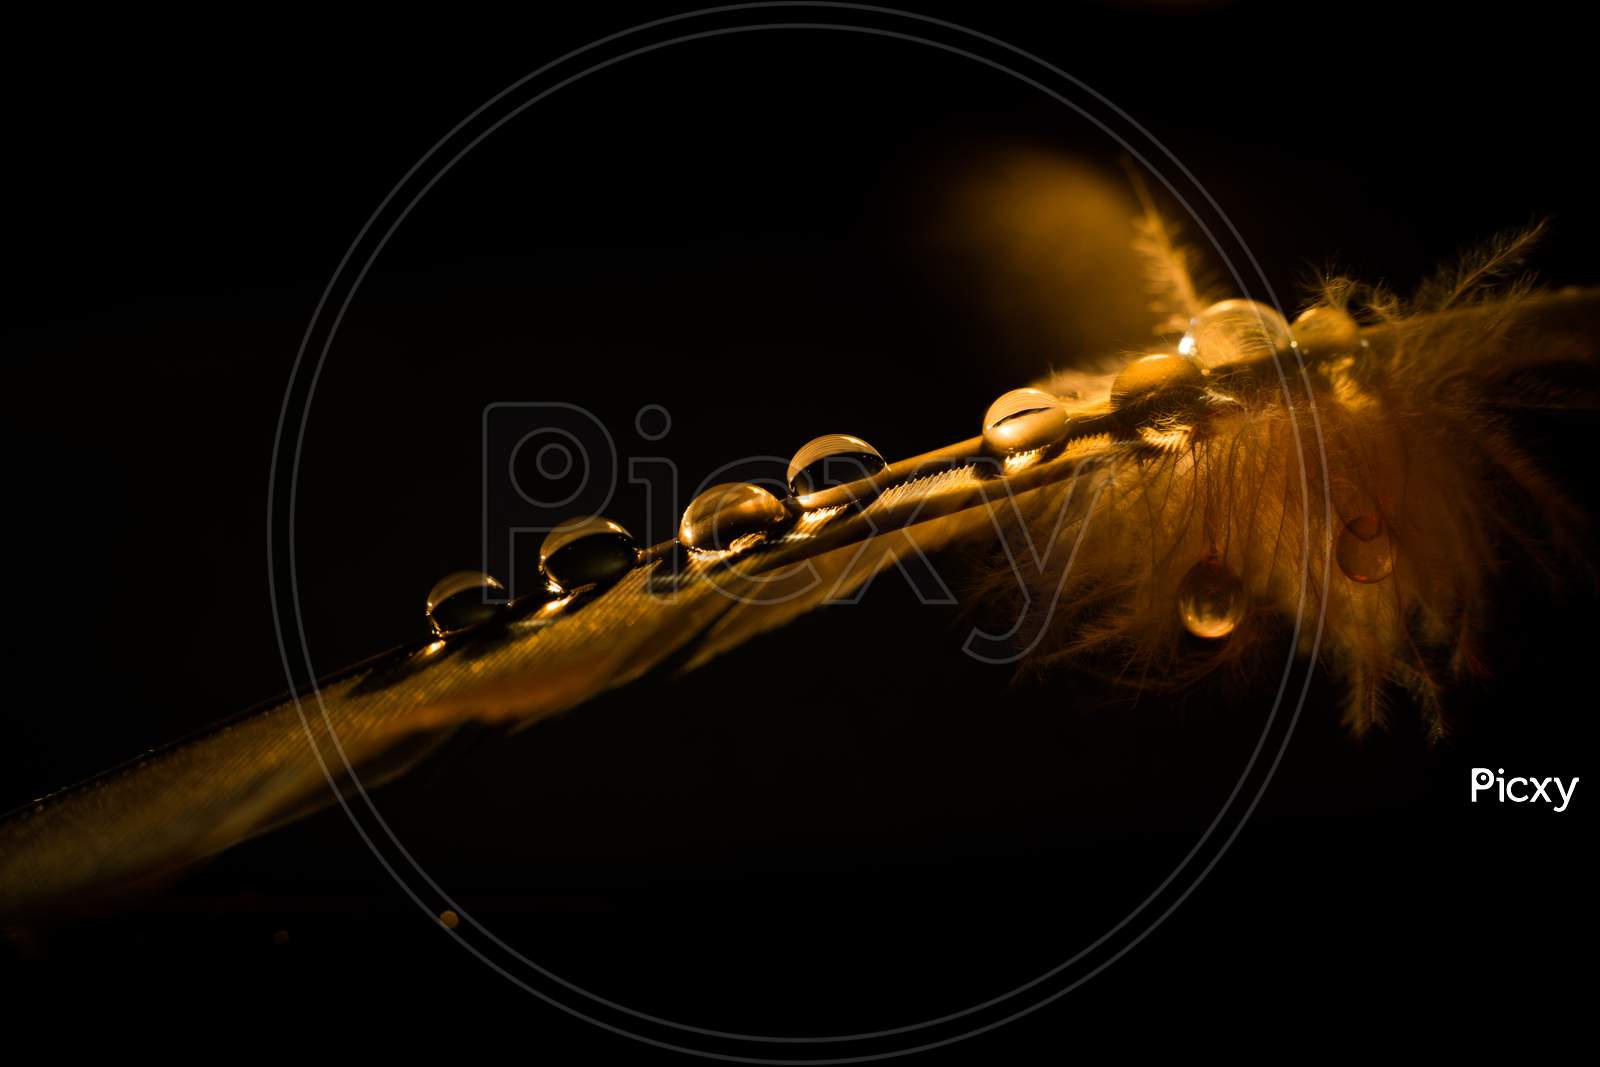 Feather On A Black Background With Water Droplets. Golden Feather Close Up.